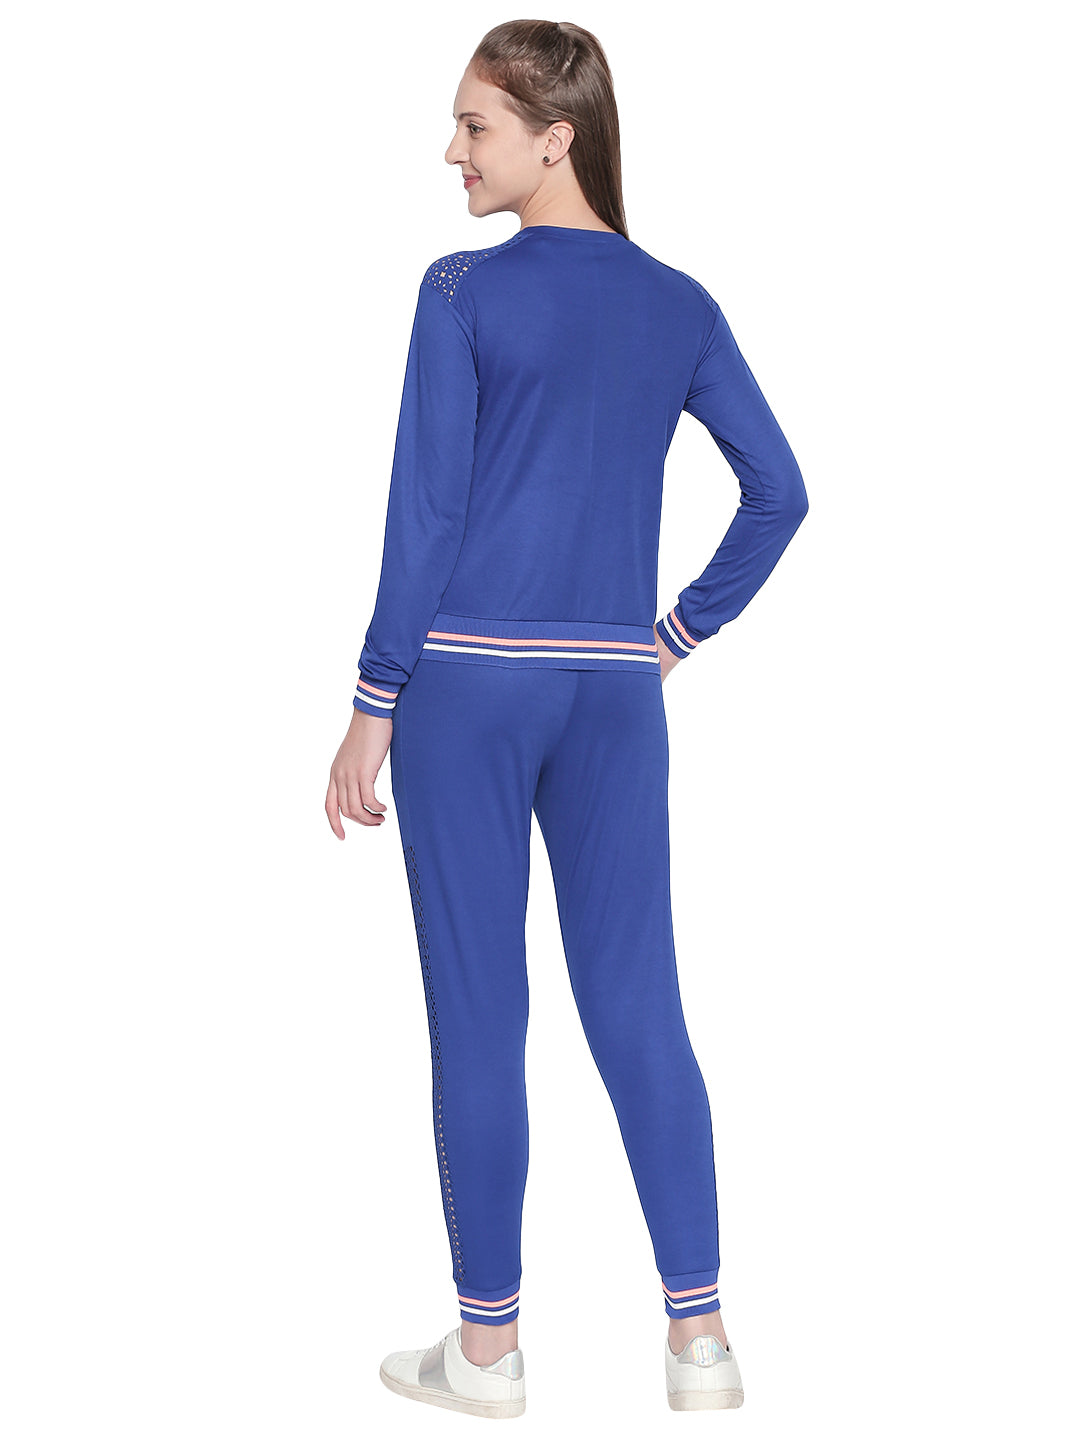 Royal Blue Color Regular fit Round Neck Full Sleeve sweat Top